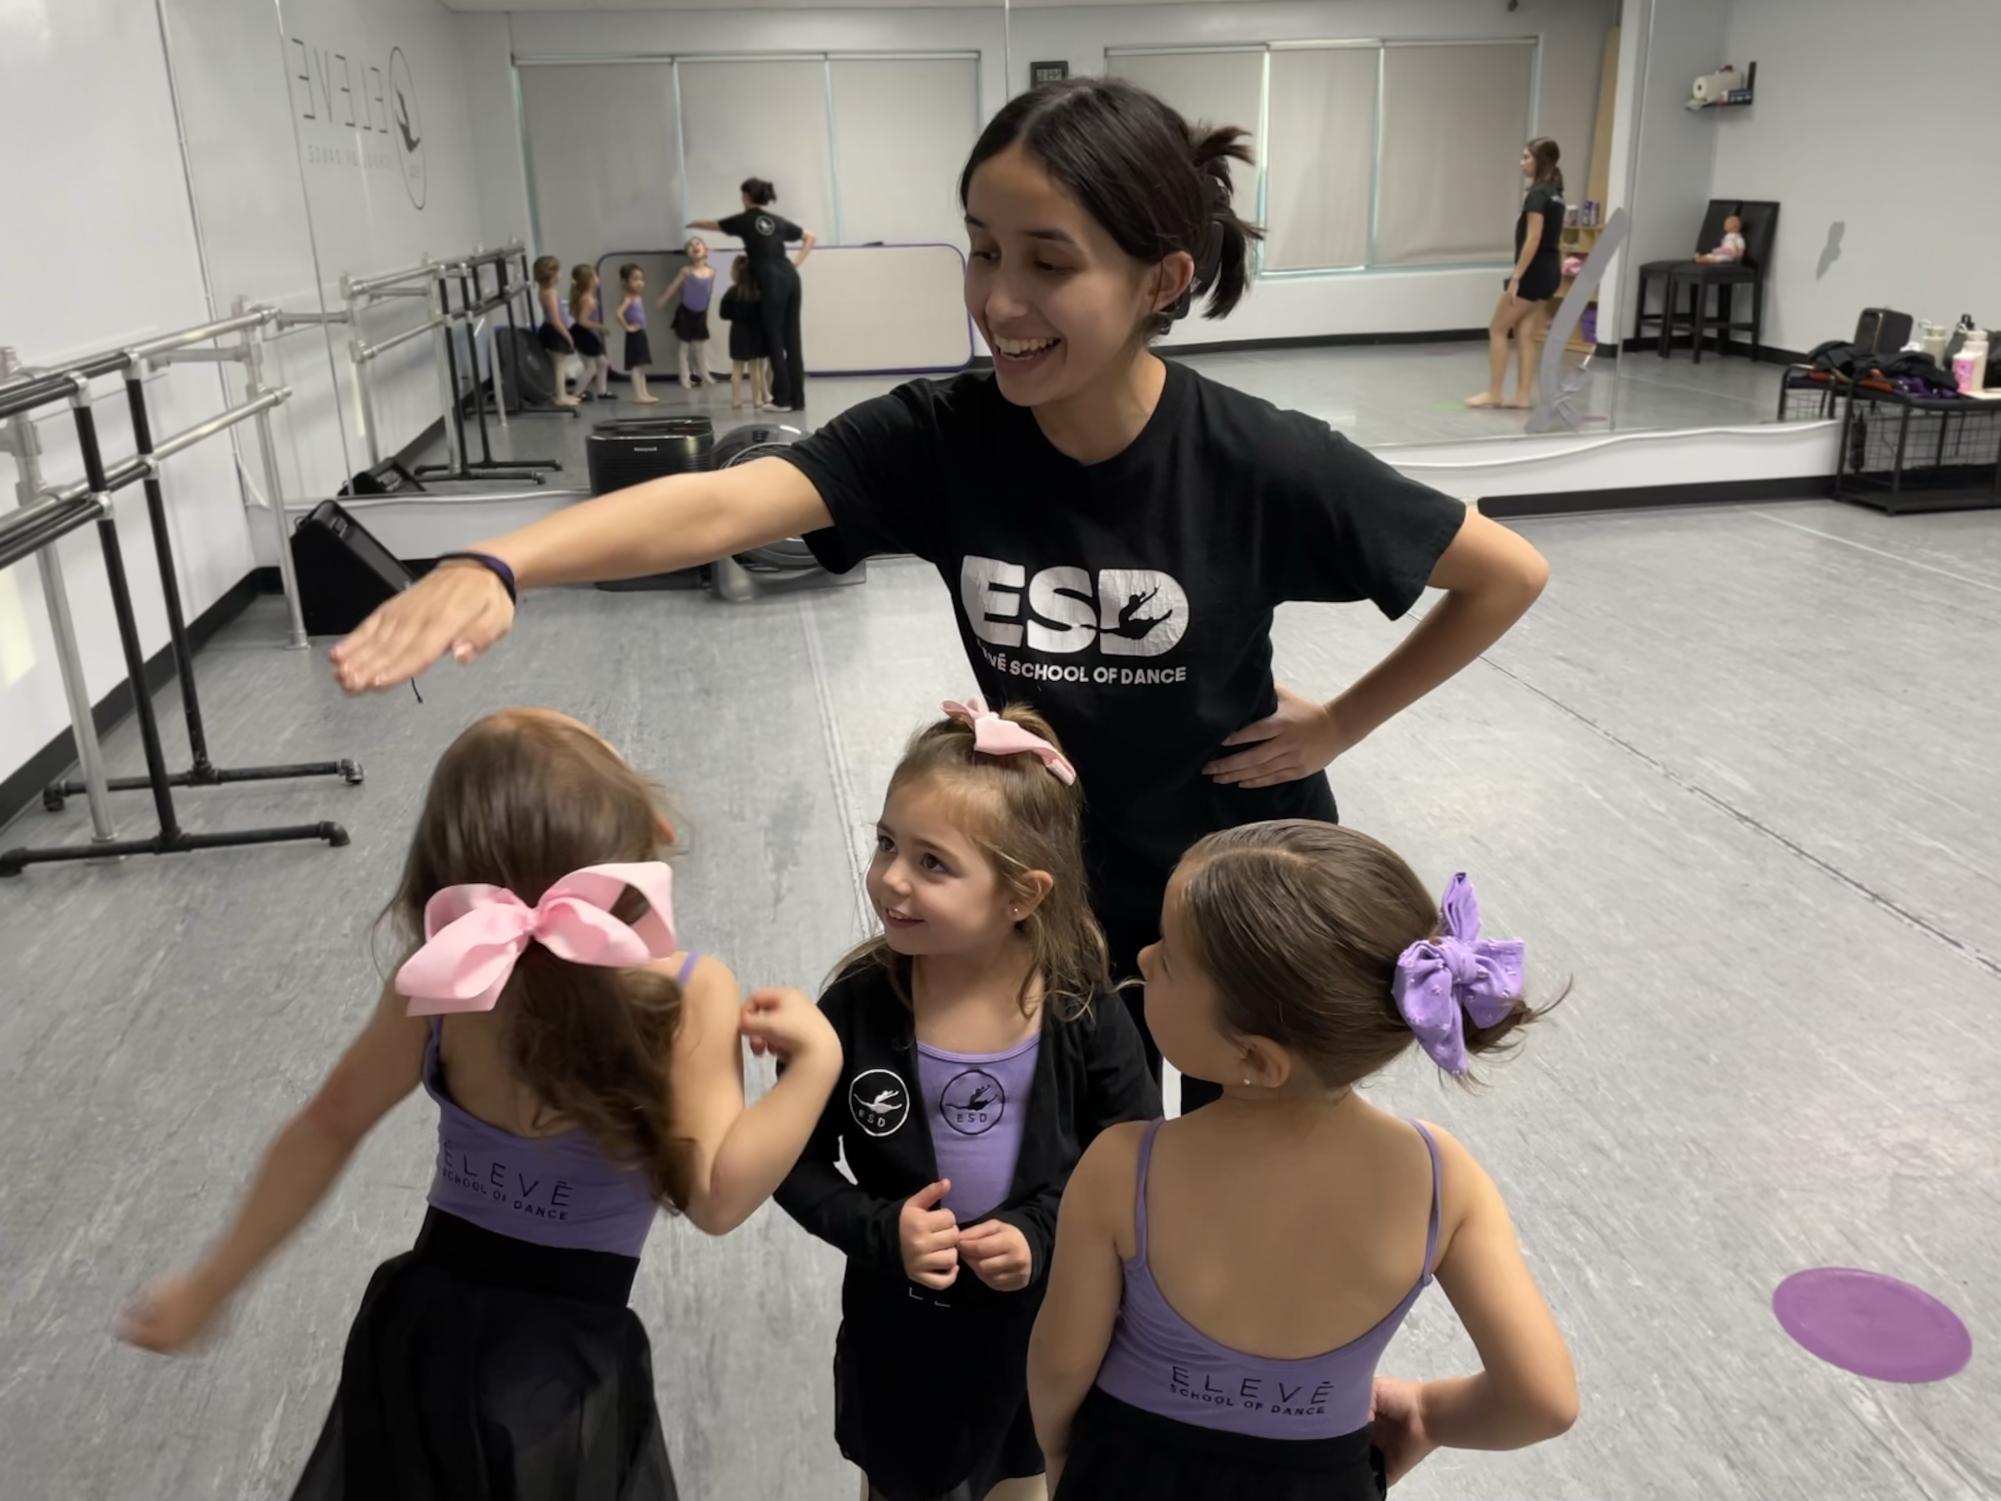 On Jan. 30 at Eleve Dance Studio, Bonita Vista High (BVH) senior Mia Garcia interacts with her young dance students. Garcias experiences with her students have changed her perspective on life and dance as an art form.